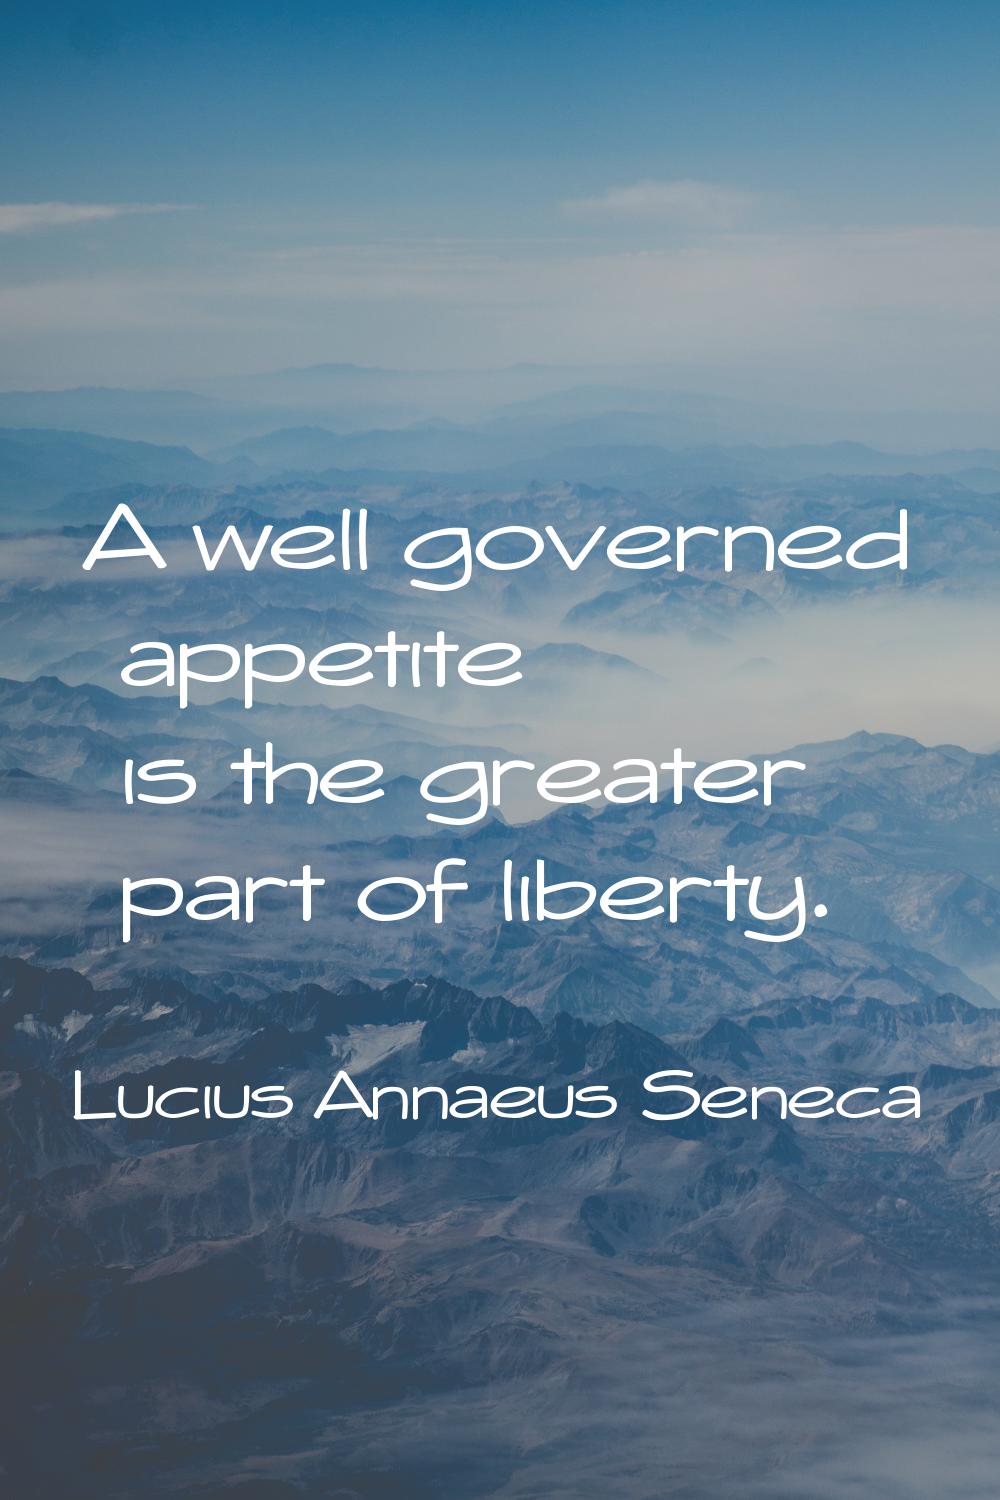 A well governed appetite is the greater part of liberty.